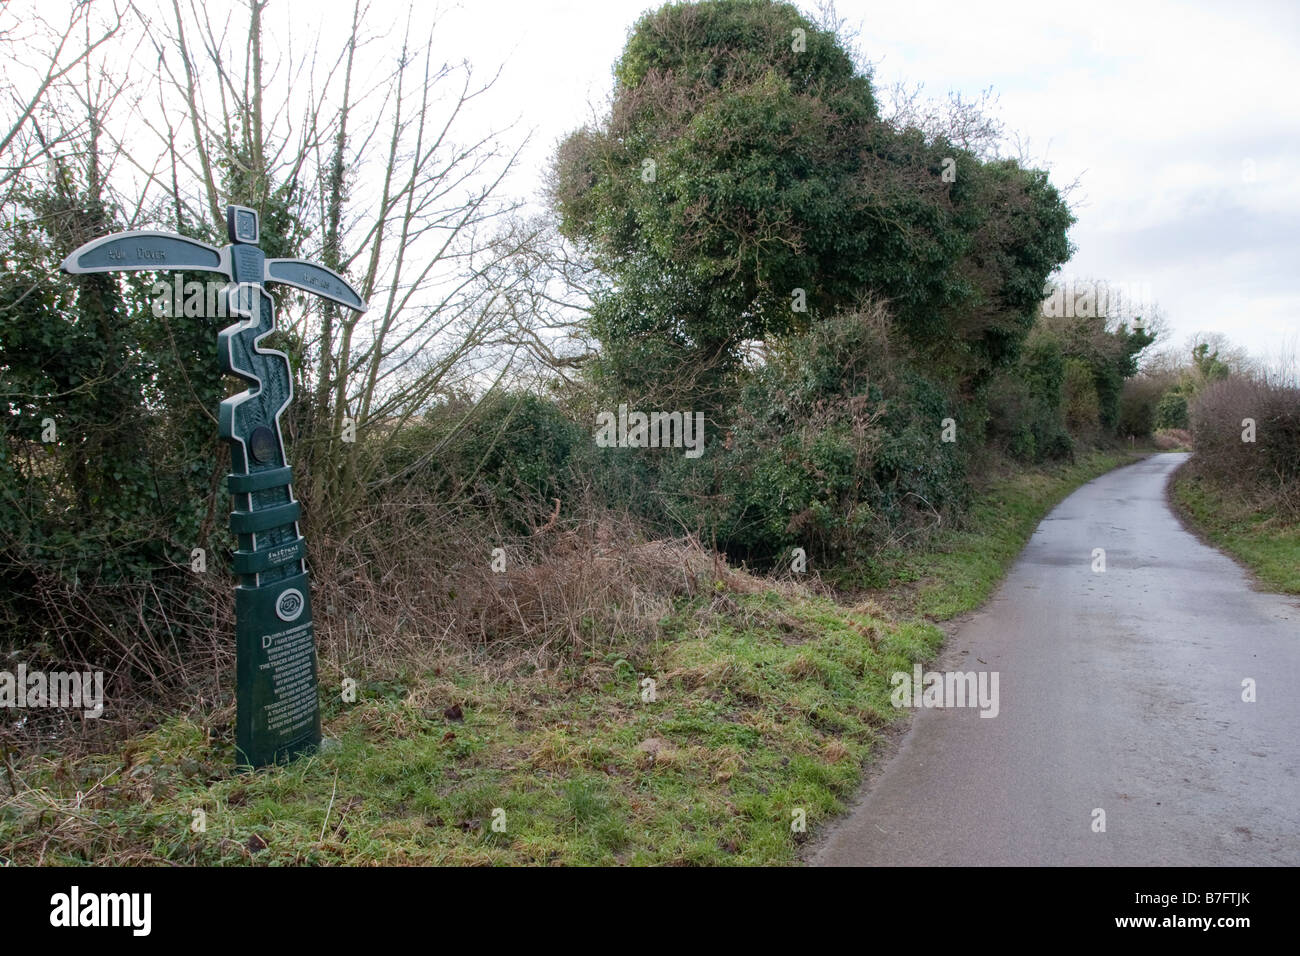 A Millennium Commission National Cycle Route sign in Fairlight, East Sussex Stock Photo